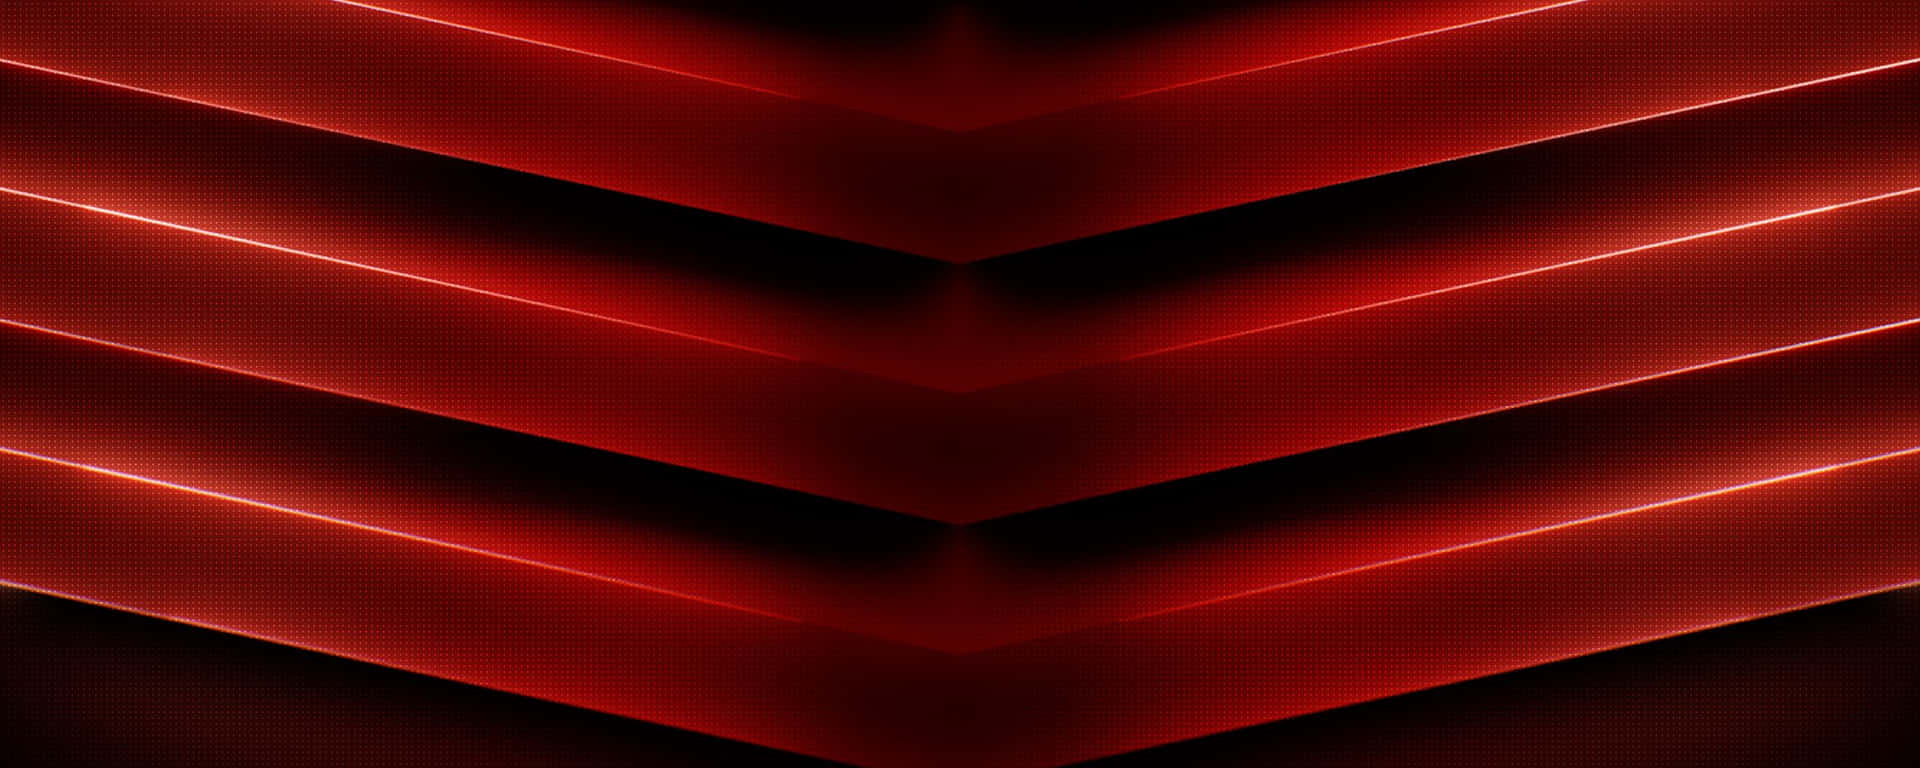 V Shaped Metals Red Ultra Wide Hd Wallpaper